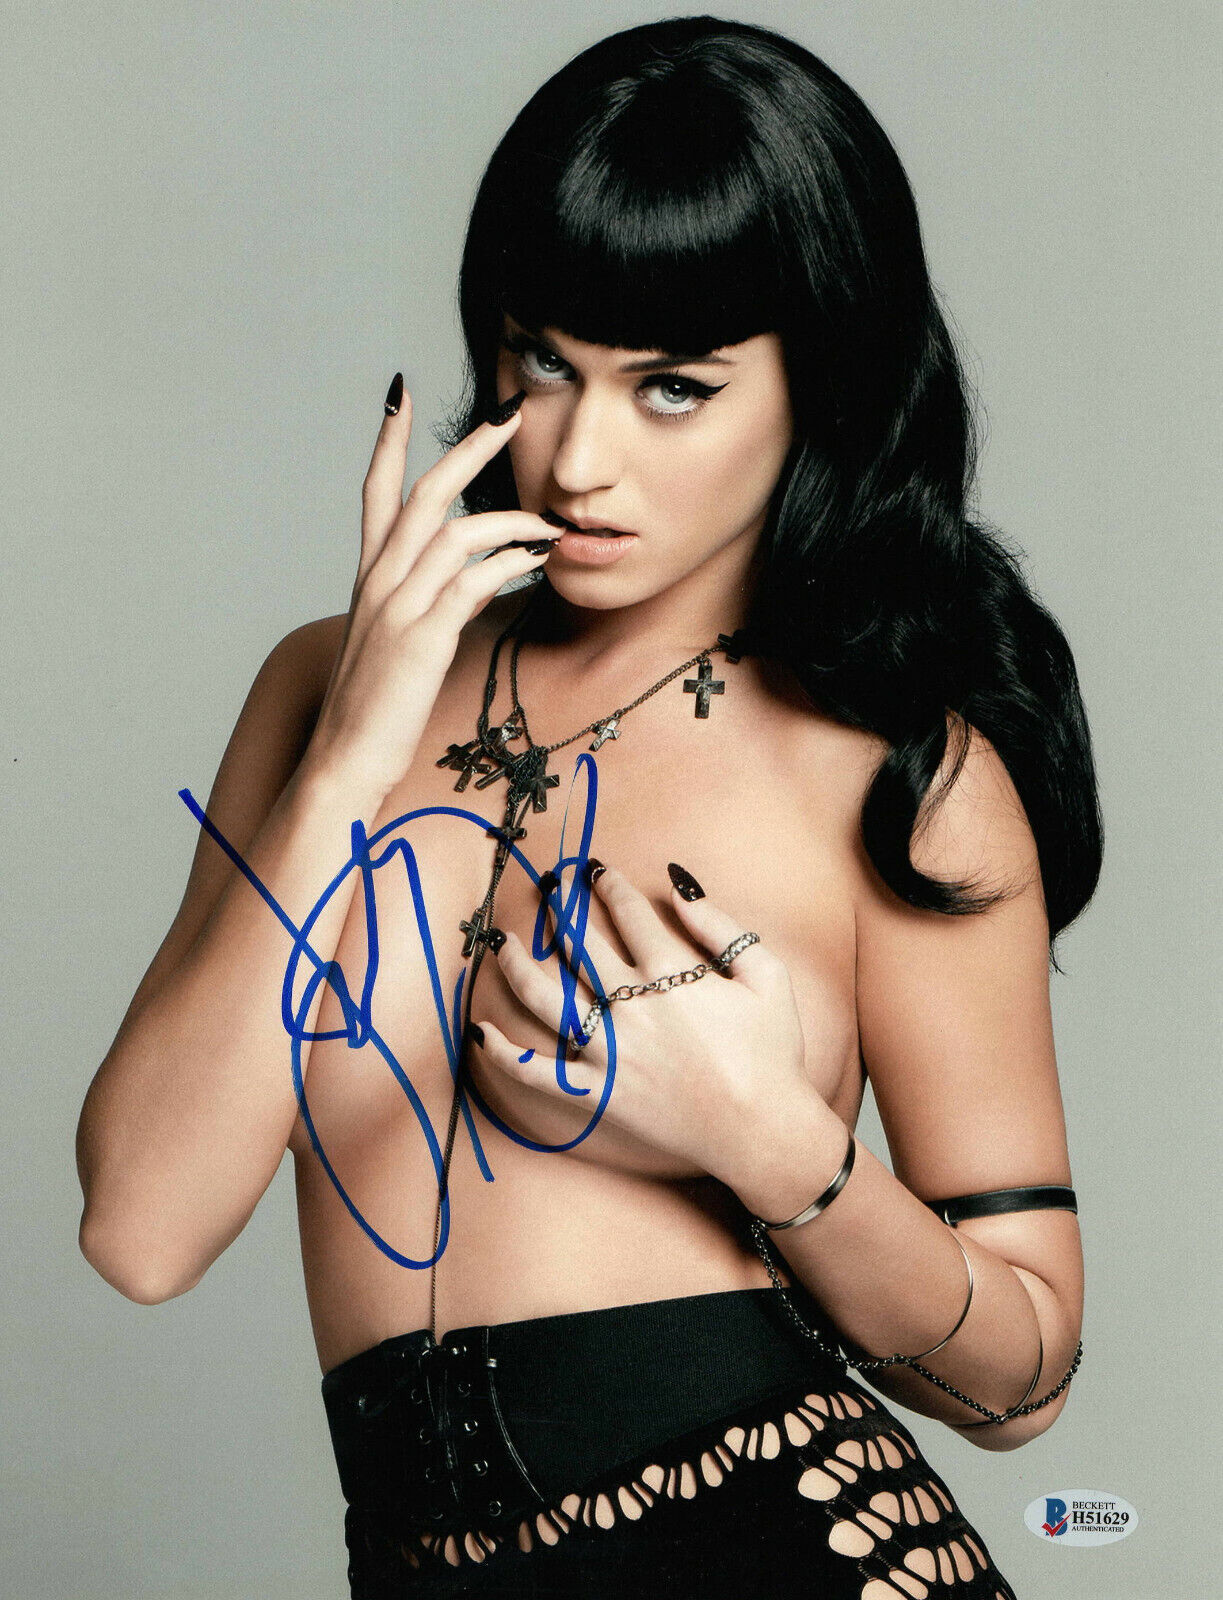 SEXY KATY PERRY SIGNED 11X14 PHOTO AUTHENTIC AUTOGRAPH BECKETT BAS 7